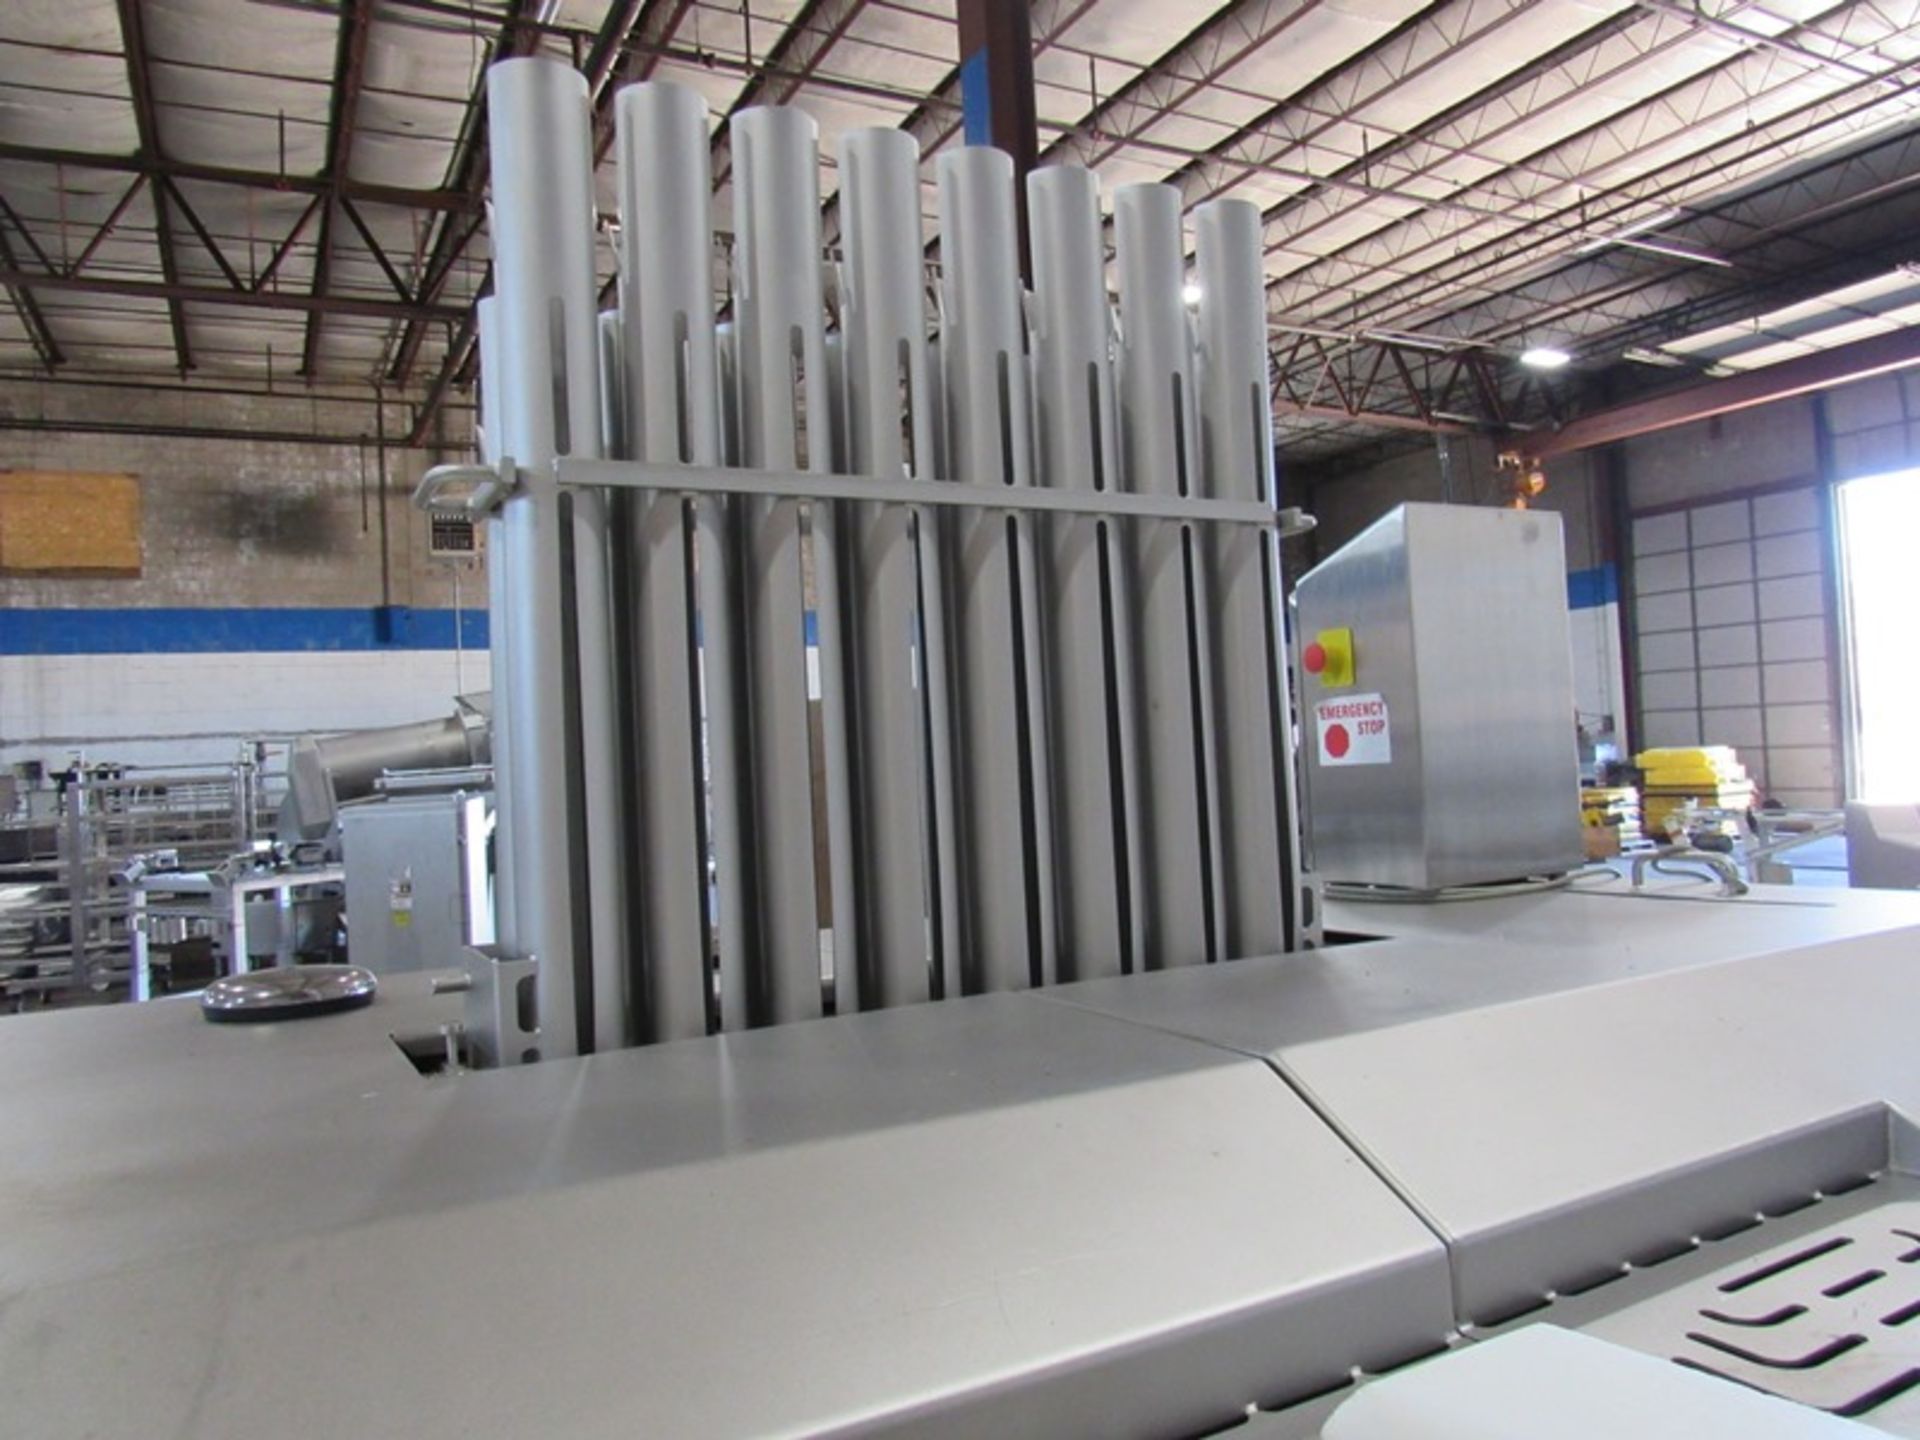 Ross Mdl. 990A Portion Slicer, Mfg. 2020, approx. new cost $288,000, (16) 3" dia. product feed tubes - Image 10 of 15